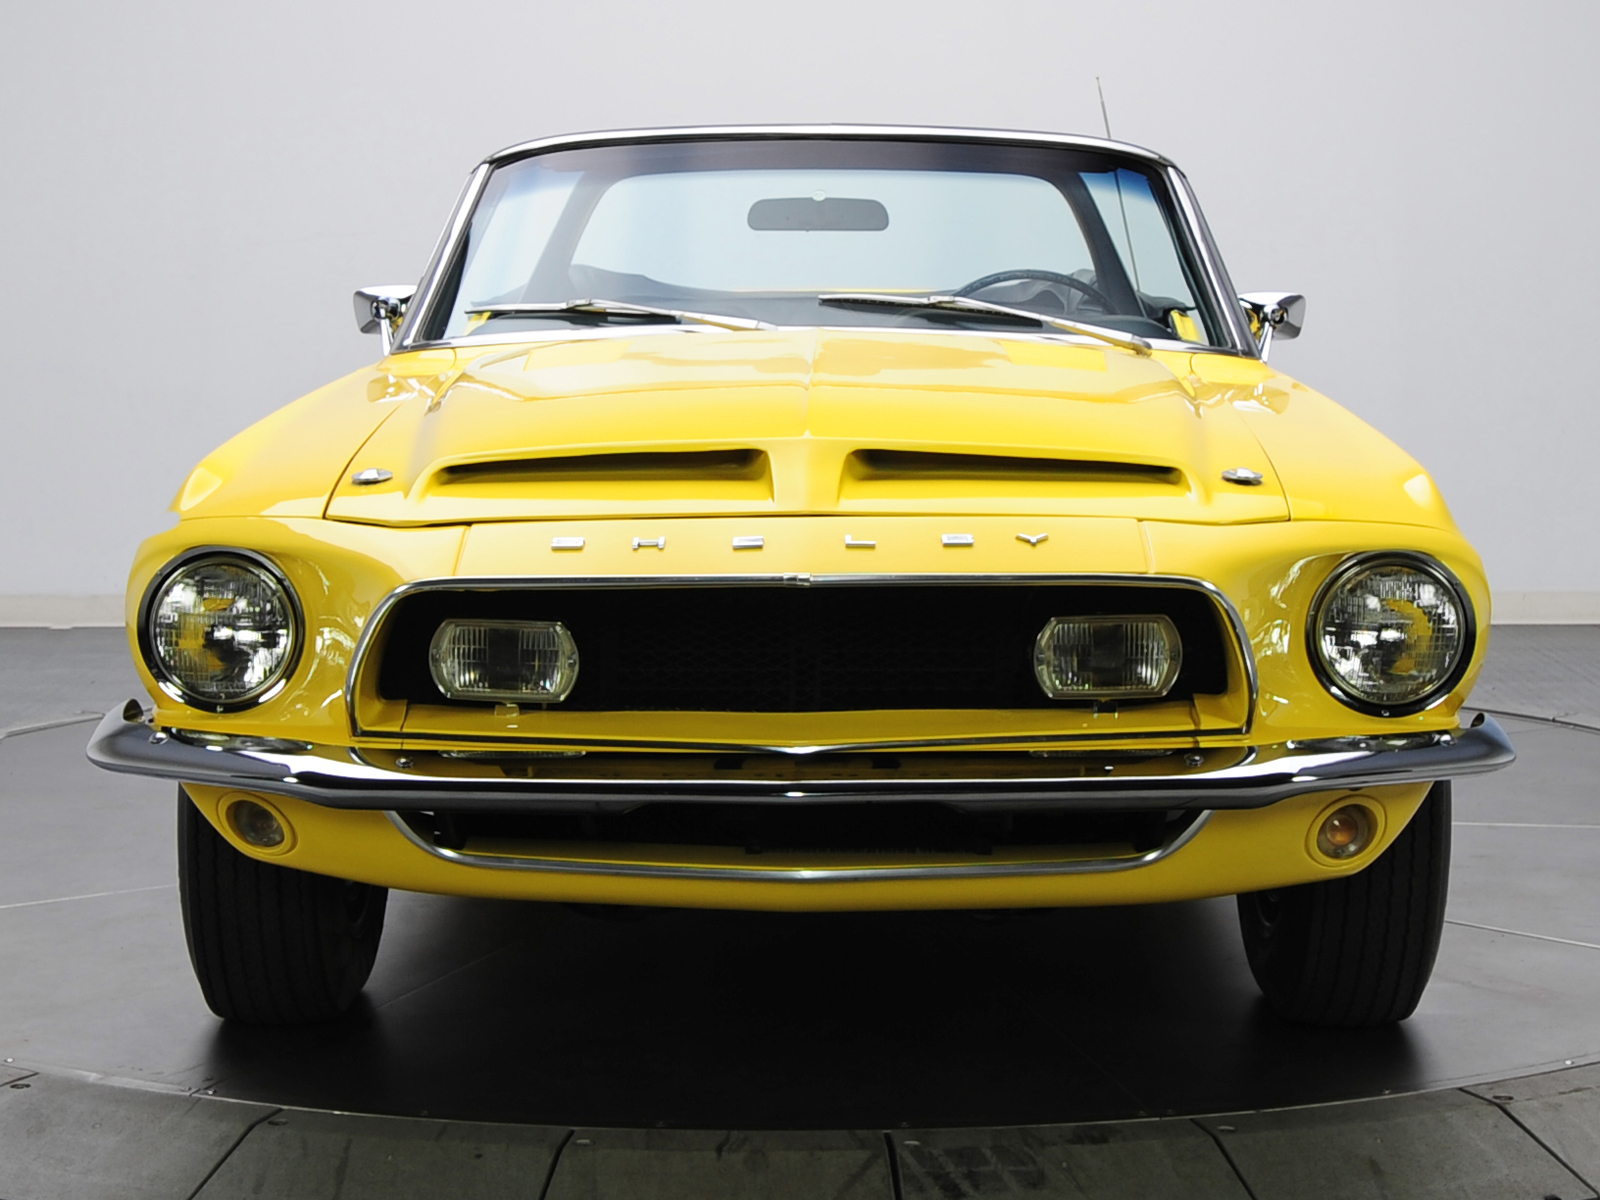 1968, Shelby, Gt500 kr, Gt500, Convertible, Ford, Mustang, Muscle, Classic Wallpaper